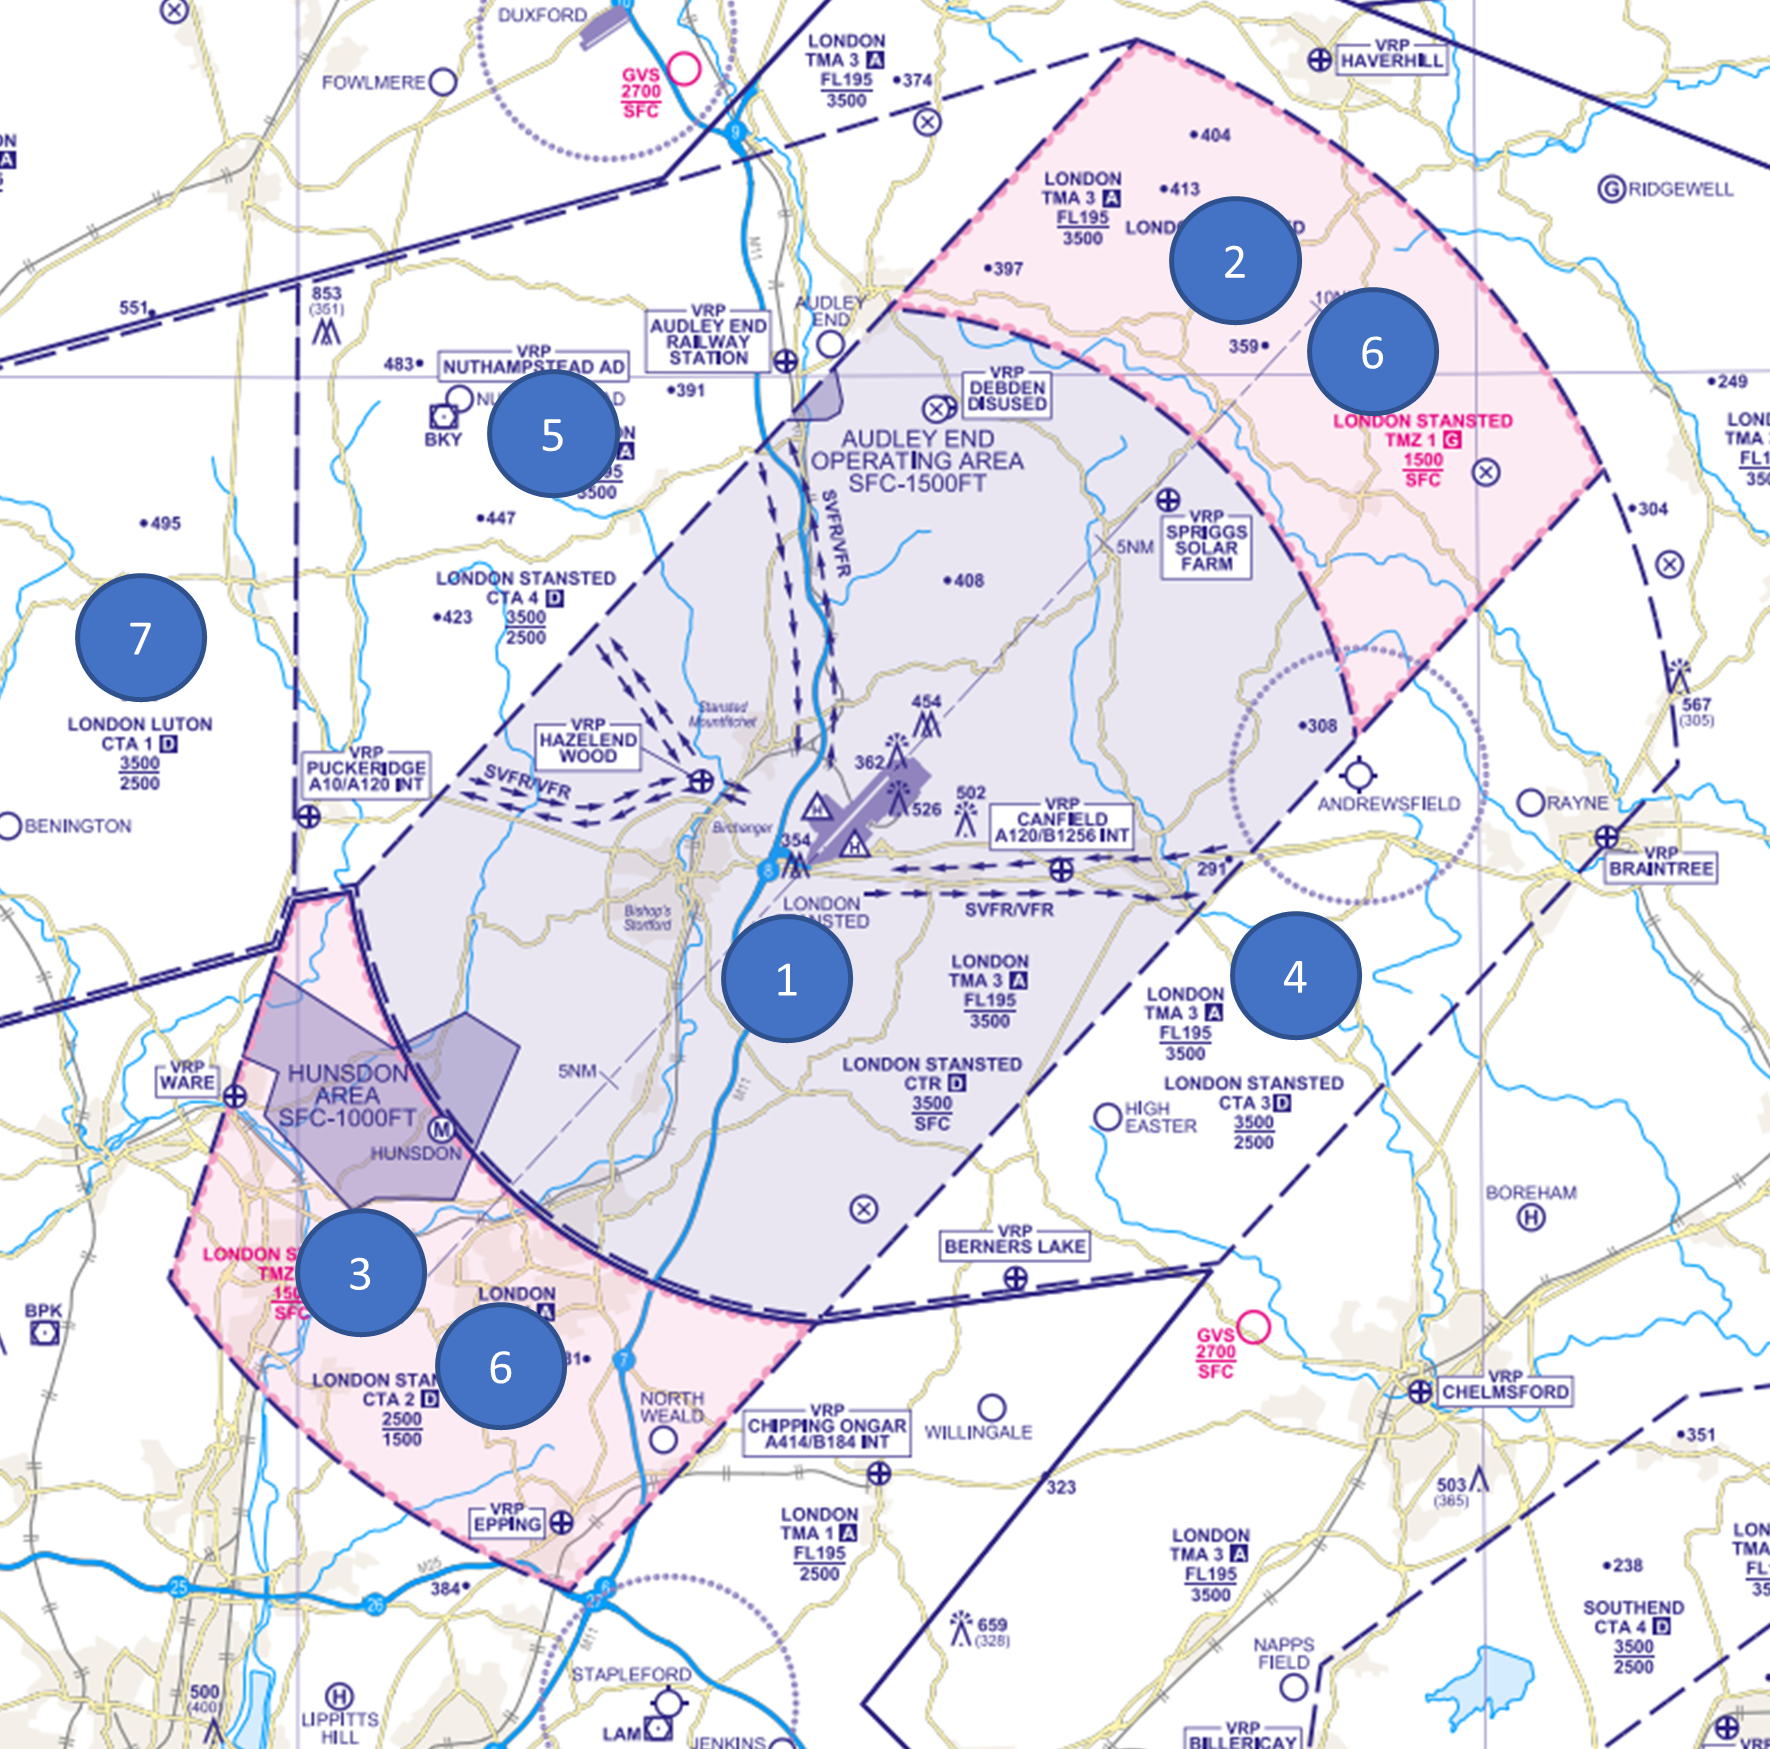 Chart extract showing airspace structures